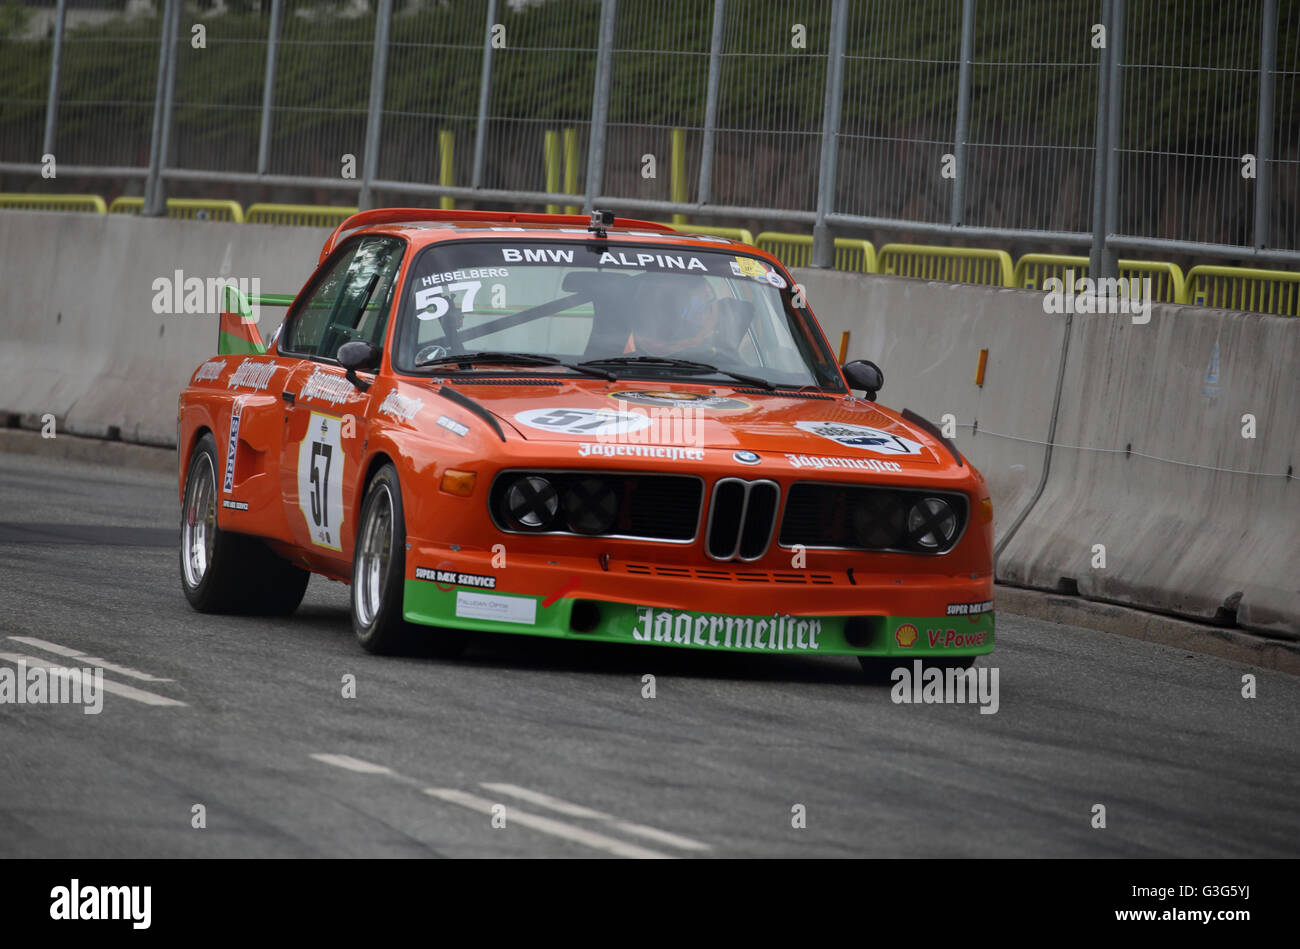 BMW 3,5 CSL being raced at Classic Race Aarhus in 2016 Stock Photo